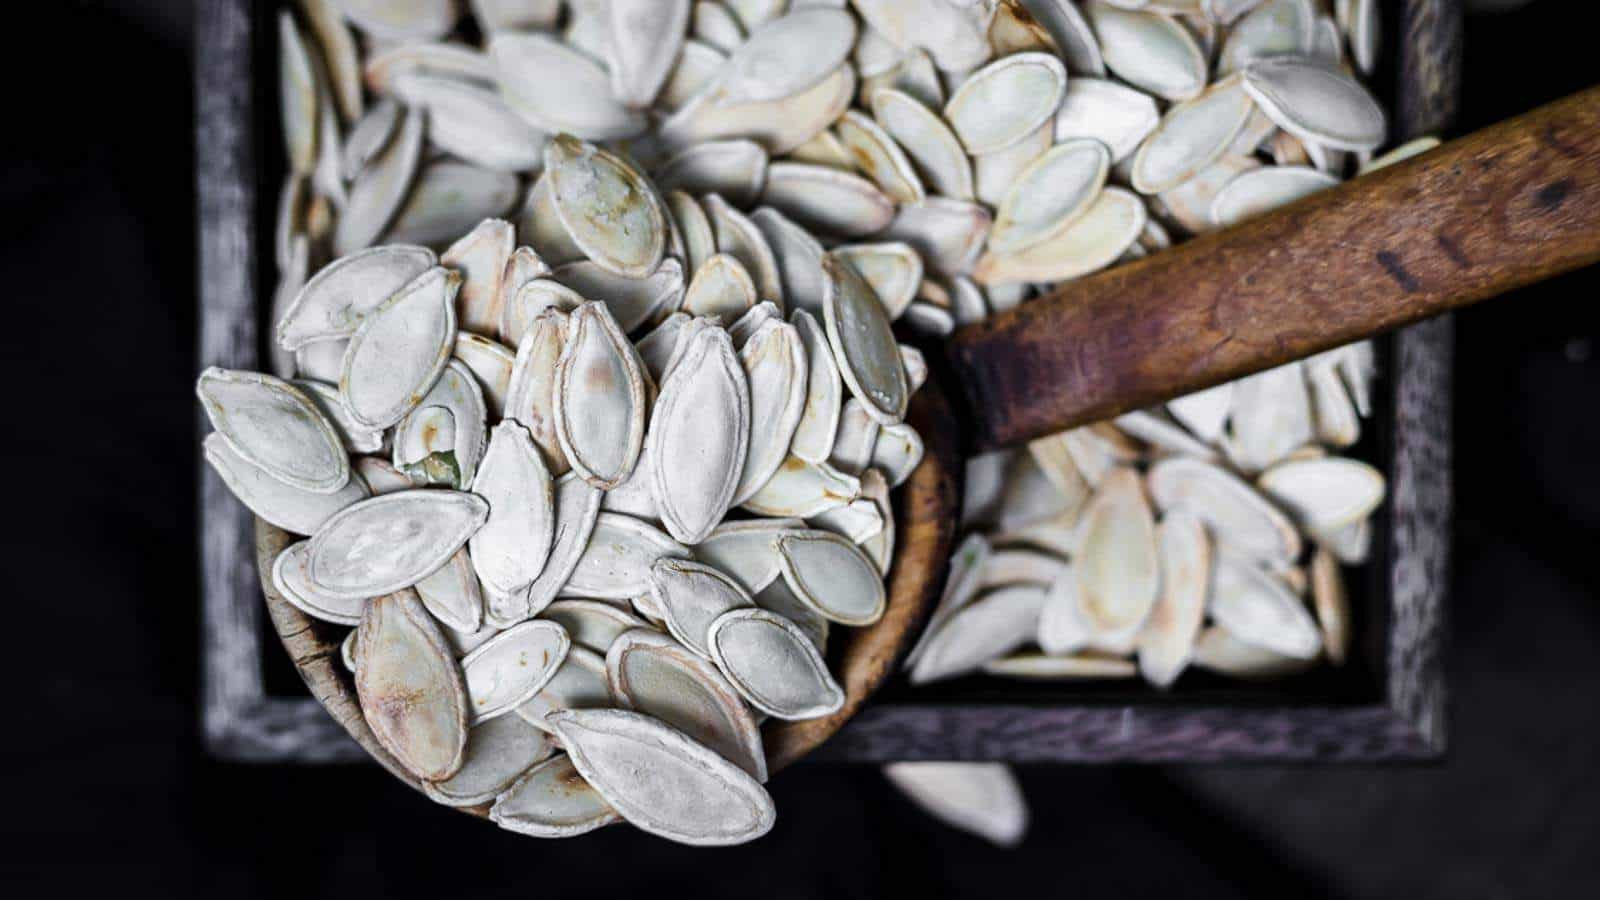 <p>Nourish your body with these oven-baked pumpkin seeds or pepitas. A nutrient-packed choice for a low-carb lifestyle, these seeds offer a crunchy and wholesome snack to kickstart your January. With a simple preparation, these bites are a convenient and nutritious option for those aiming to make mindful choices in the new year.<br><strong>Get the Recipe: </strong><a href="https://www.lowcarb-nocarb.com/easy-roasted-pumpkin-seeds-pepitas/?utm_source=msn&utm_medium=page&utm_campaign=msn">Oven Baked Pumpkin Seeds or Pepitas</a></p>